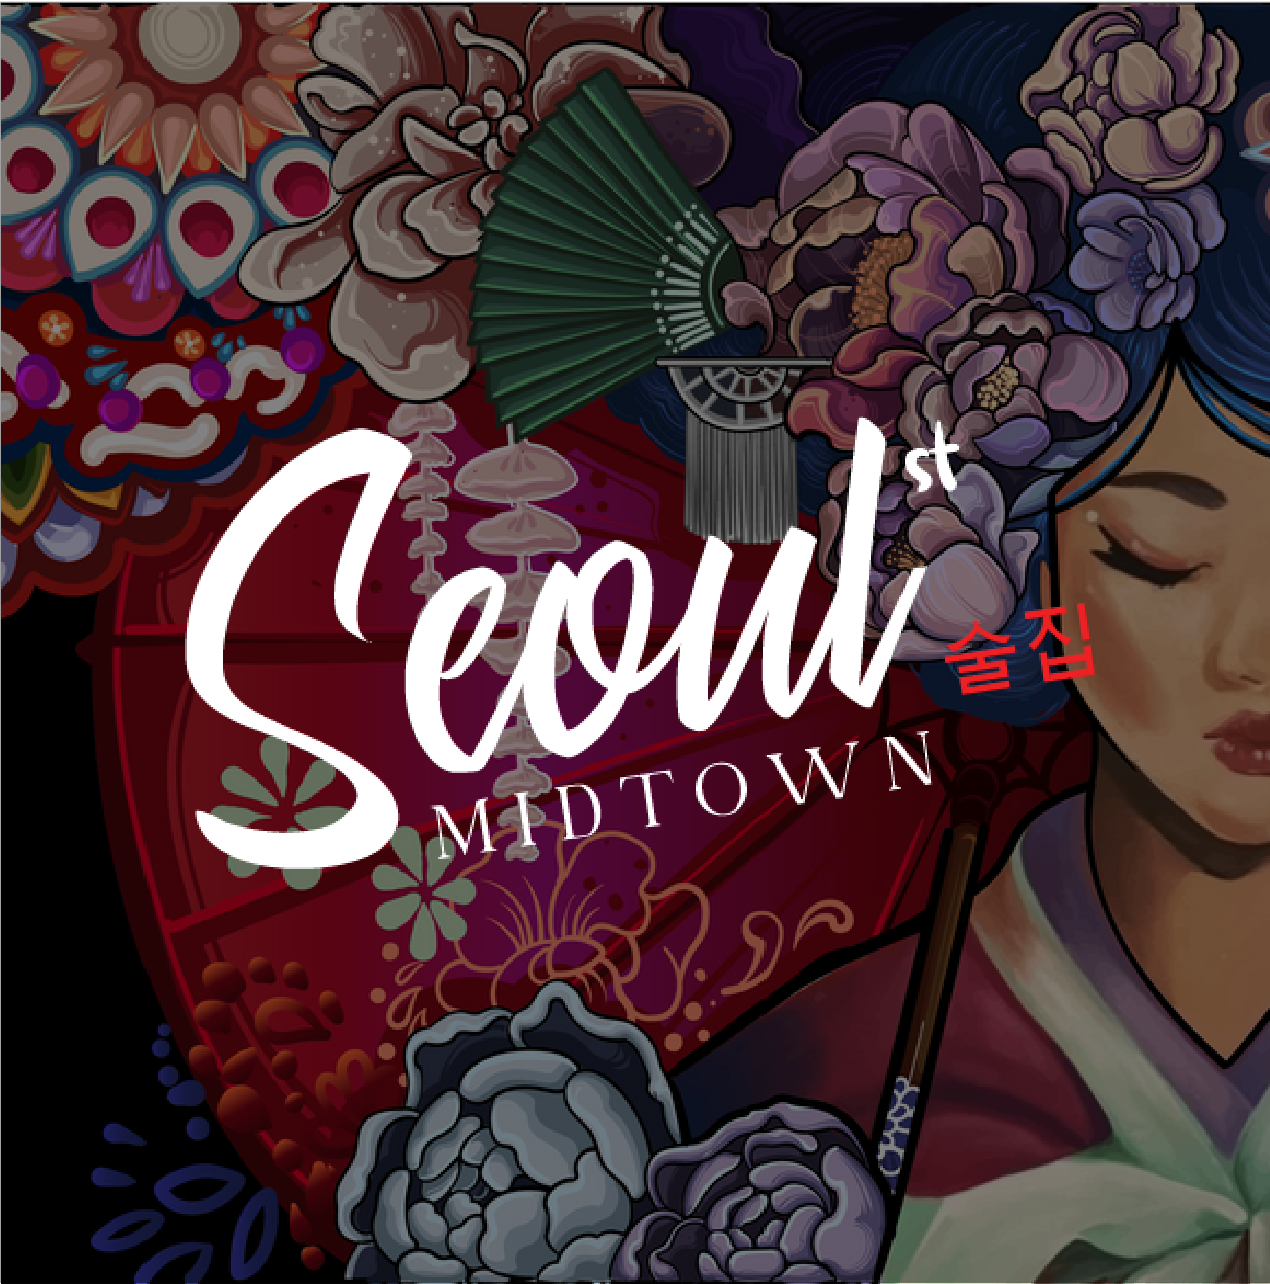 A poster for seoul midtown with a woman holding a fan